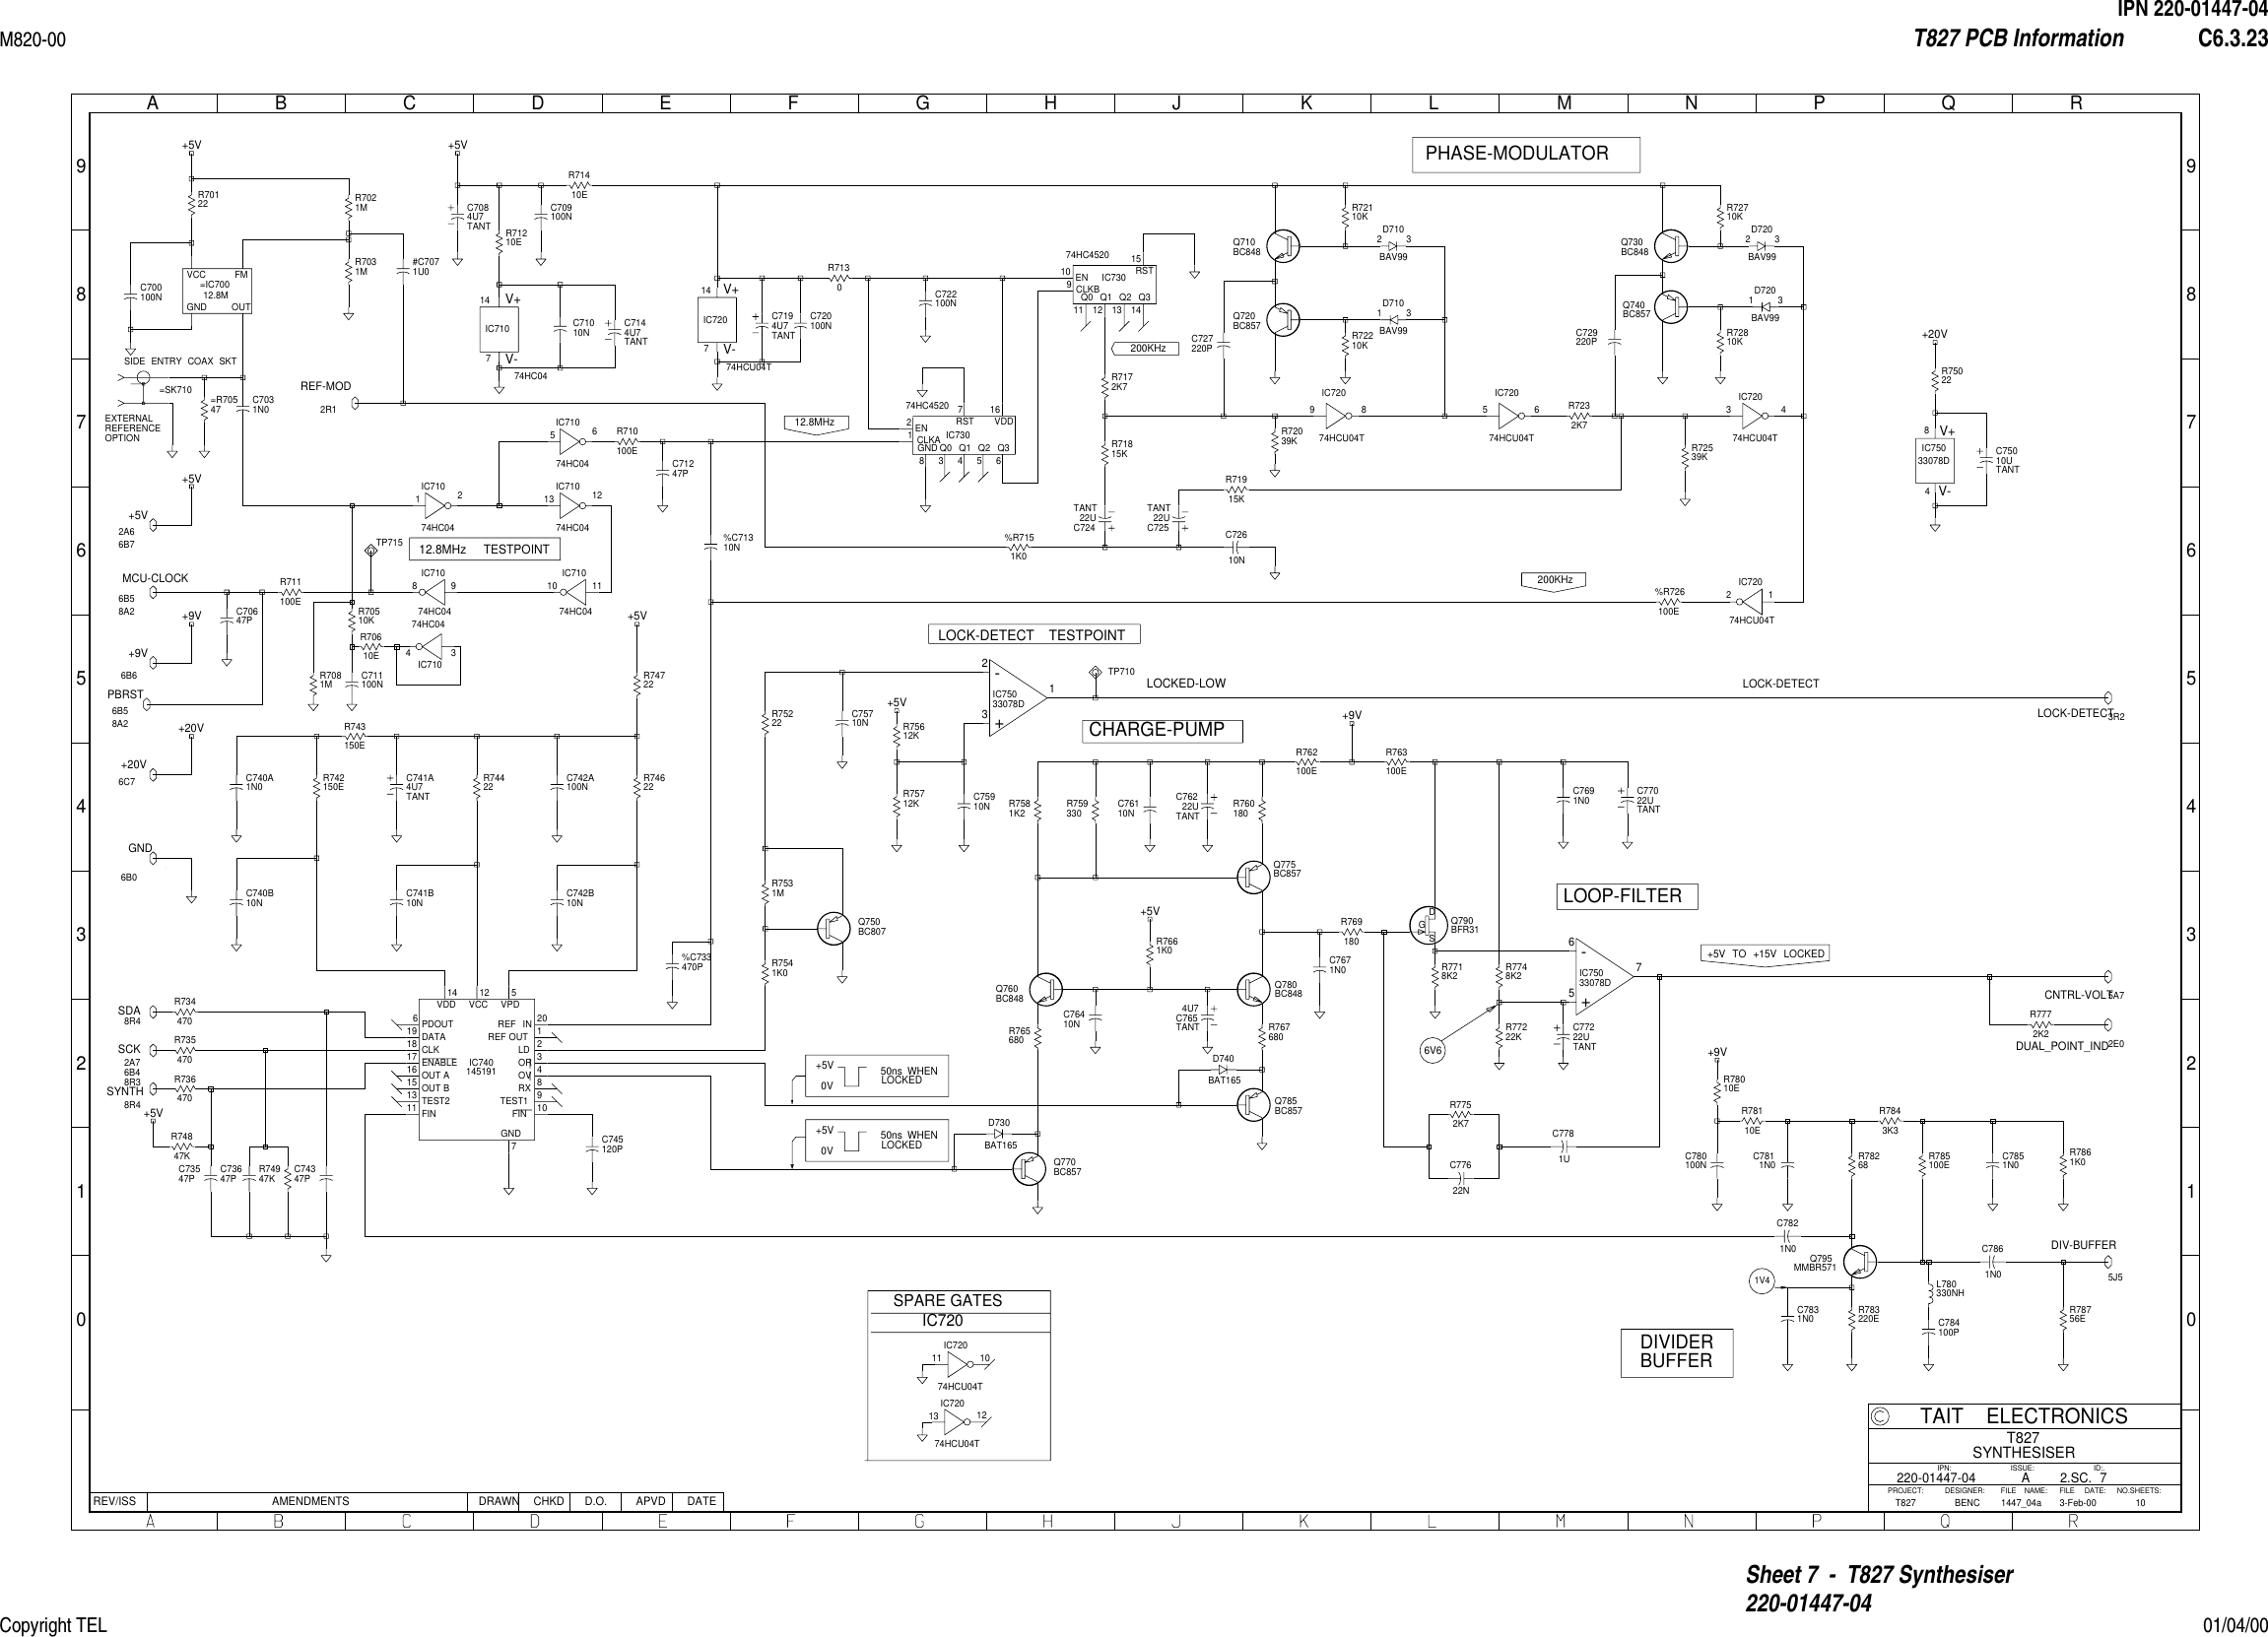 IPN 220-01447-04M820-00 T827 PCB Information C6.3.23Copyright TEL 01/04/00Sheet 7  -  T827 Synthesiser220-01447-0401234567890123456789ABCDEFGHJ KLMNPQRREV/ISS AMENDMENTS DATEAPVDD.O.CHKDDRAWNNO.SHEETS:FILE NAME:TAIT ELECTRONICSIPN:FILE DATE:ISSUE: ID:.2.SC.PROJECT: DESIGNER:710T827SYNTHESISER1447_04a220-01447-043-Feb-00AT827 BENC  1V4IC740145191    REF IN 20REF OUT 1LD 2OR 3OV 4RX 8TEST1 9FIN 10GND7VPD5VCC12VDD14PDOUT6DATA19CLK18ENABLE17OUT A16OUT B15TEST213FIN11R78010E    R785100E    R7861K0    C7811N0    C7831N0    R78756E    C784100P    C7821N0    R70122        12.8M=IC700GND OUTVCC FMR7031M    R7021M    C700100N    C709100N    C71010N    R71410E    C7031N0    IC71074HC04    V-7V+14IC71074HC04    12IC71074HC04    98IC73074HC4520    EN2CLKA1GND8Q03Q14Q25Q36RST7VDD16IC73074HC4520    EN10CLKB9Q011Q112Q213Q314RST15R711100E    C722100N    R7130    TANTC7084U7    R7172K7    R71815K    C727220P    R72110K    R72210K    R7232K7    C729220P    R72810K    IC75033078D    V-4V+8+-IC75033078D    567C77622N    %C71310N    %R7151K0    C741B10N    R74422    C740B10N    R742150E    R74622    R74722    C742B10N    C742A100N    TANTC741A4U7    R767680    R7541K0    R7531M    R75222    C75710N    R75022    R75712K    R75612K    C75910N    TP710    C76410N     TANTC7654U7    R7661K0    R765680    R760180     R759330    C76110N     TANTC76222U    C7671N0    R769180    R762100E    R7718K2    R763100E    TANTC77022U    TANTC77222U    C7691N0    R7748K2    R77222K    R7752K7    R783220E    C780100N     C74347P    C73647P    C73547P    R74847K    R71915K    C72610N    R72710K    %R726100E    %C733470P    R78110E    C7861N0    C745120P    #C7071U0    R74947K    TANTC72422U    =R70547    =SK710SIDE ENTRY COAX SKT    IC71074HC04    13 12IC72074HCU04T    V-7V+14IC71074HC04    56IC72074HCU04T    98IC72074HCU04T    56IC72074HCU04T    34IC72074HCU04T    12+-IC75033078D    321R743150E    C740A1N0    IC71074HC04    1110R710100E    IC71074HC04    34IC72074HCU04T    13 12IC72074HCU04T    11 10C720100N    Q710BC848    Q720BC857    Q730BC848    Q740BC857    Q750BC807    Q770BC857    Q760BC848    Q780BC848    Q785BC857    Q775BC857    DSGQ790BFR31    Q795MMBR571    D710BAV99    23 D720BAV99    23D710BAV99    31D720BAV99    31D730BAT165    D740BAT165    C71247P    TANTC72522U    R72039K     R72539K    R7581K2     R7772K2    TP715    C70647P    R78268    R7843K3    L780330NH    R71210E    TANTC7194U7    R70610E    C711100N    R70510K    R7081M    TANTC7144U7    R736470    R735470    R734470    TANTC75010U    C7851N0    C7781U    +9V+5V +5V+5V+5V+5V+9V+5VGND1R01R02R33R84G45A36B08A09C5MCU-CLOCK6B58A2SDA8R4SCK6B48R38R3SYNTH8R4REF-MOD2R1+5V2A66B7+9V6C78A1+20V6C7+5V+9V+20V+20VLOCK-DETECT3R2DIV-BUFFER5J5CNTRL-VOLT5A7DUAL_POINT_IND2E0PBRST6B58A2SPARE GATESIC720LOCK-DETECT TESTPOINTLOCKED-LOWEXTERNALREFERENCEOPTION6B66B02A76B48R312.8MHz TESTPOINTLOOP-FILTERDIVIDERBUFFERCHARGE-PUMPPHASE-MODULATOR6V612.8MHz200KHz200KHz+5V TO +15V LOCKED50ns WHEN+5V0V LOCKED50ns WHEN+5V0V LOCKEDBAT165BAT165LOCK-DETECT